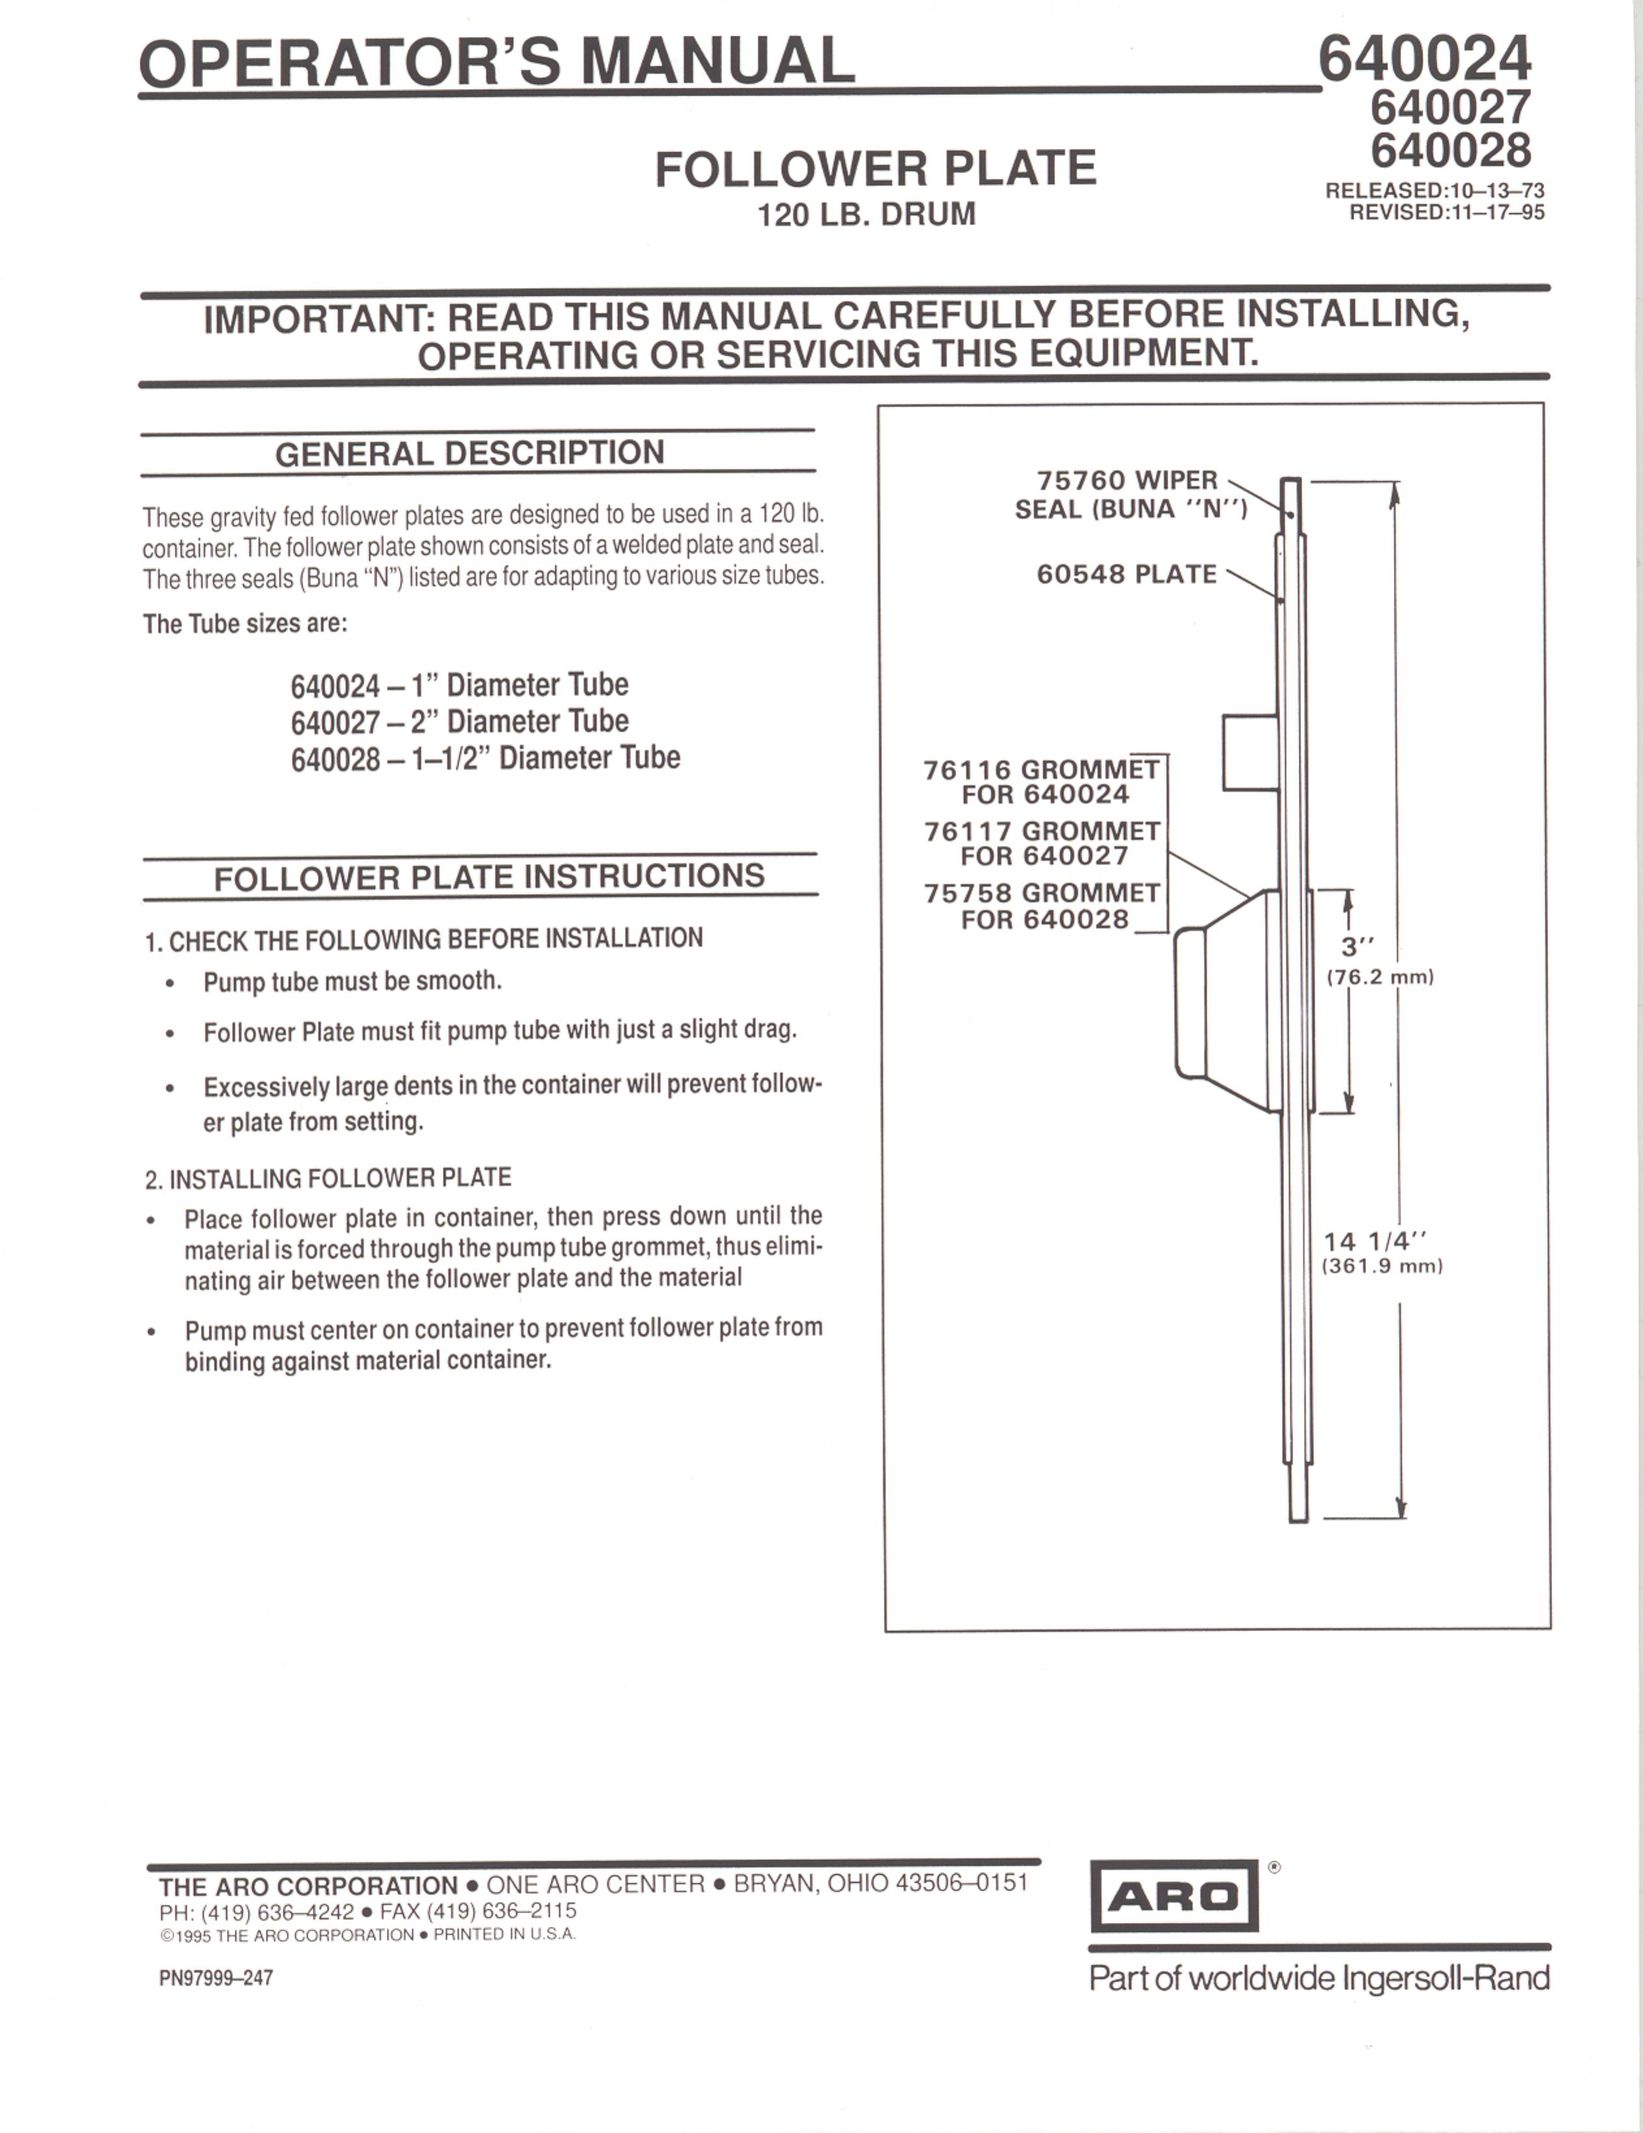 Ingersoll-Rand 640024 Biscuit Joiner User Manual